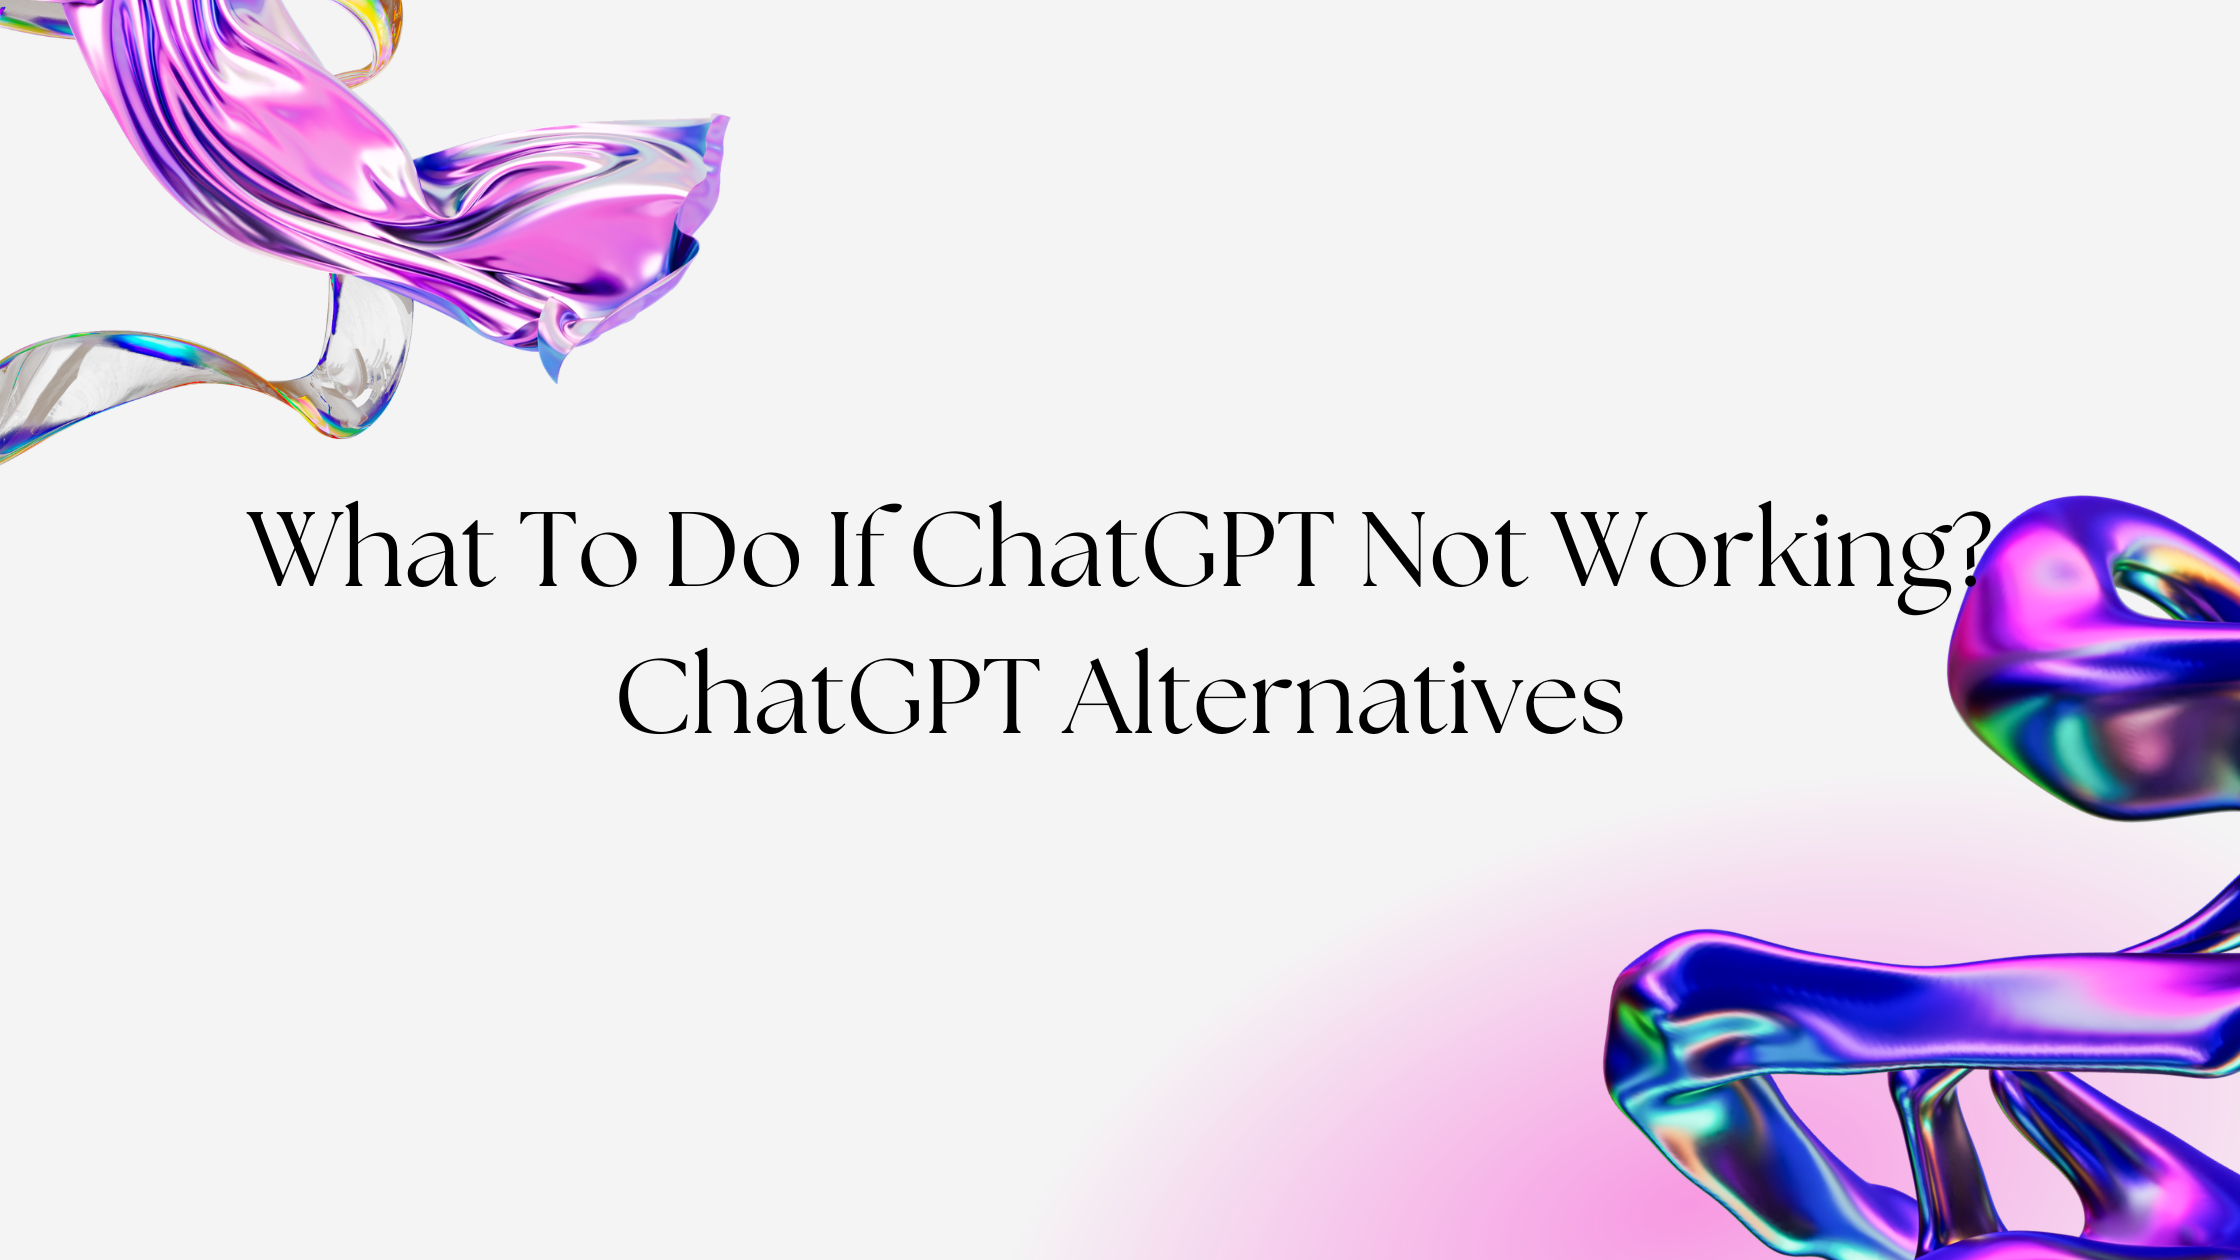 What To Do If ChatGPT Not Working? ChatGPT Alternatives